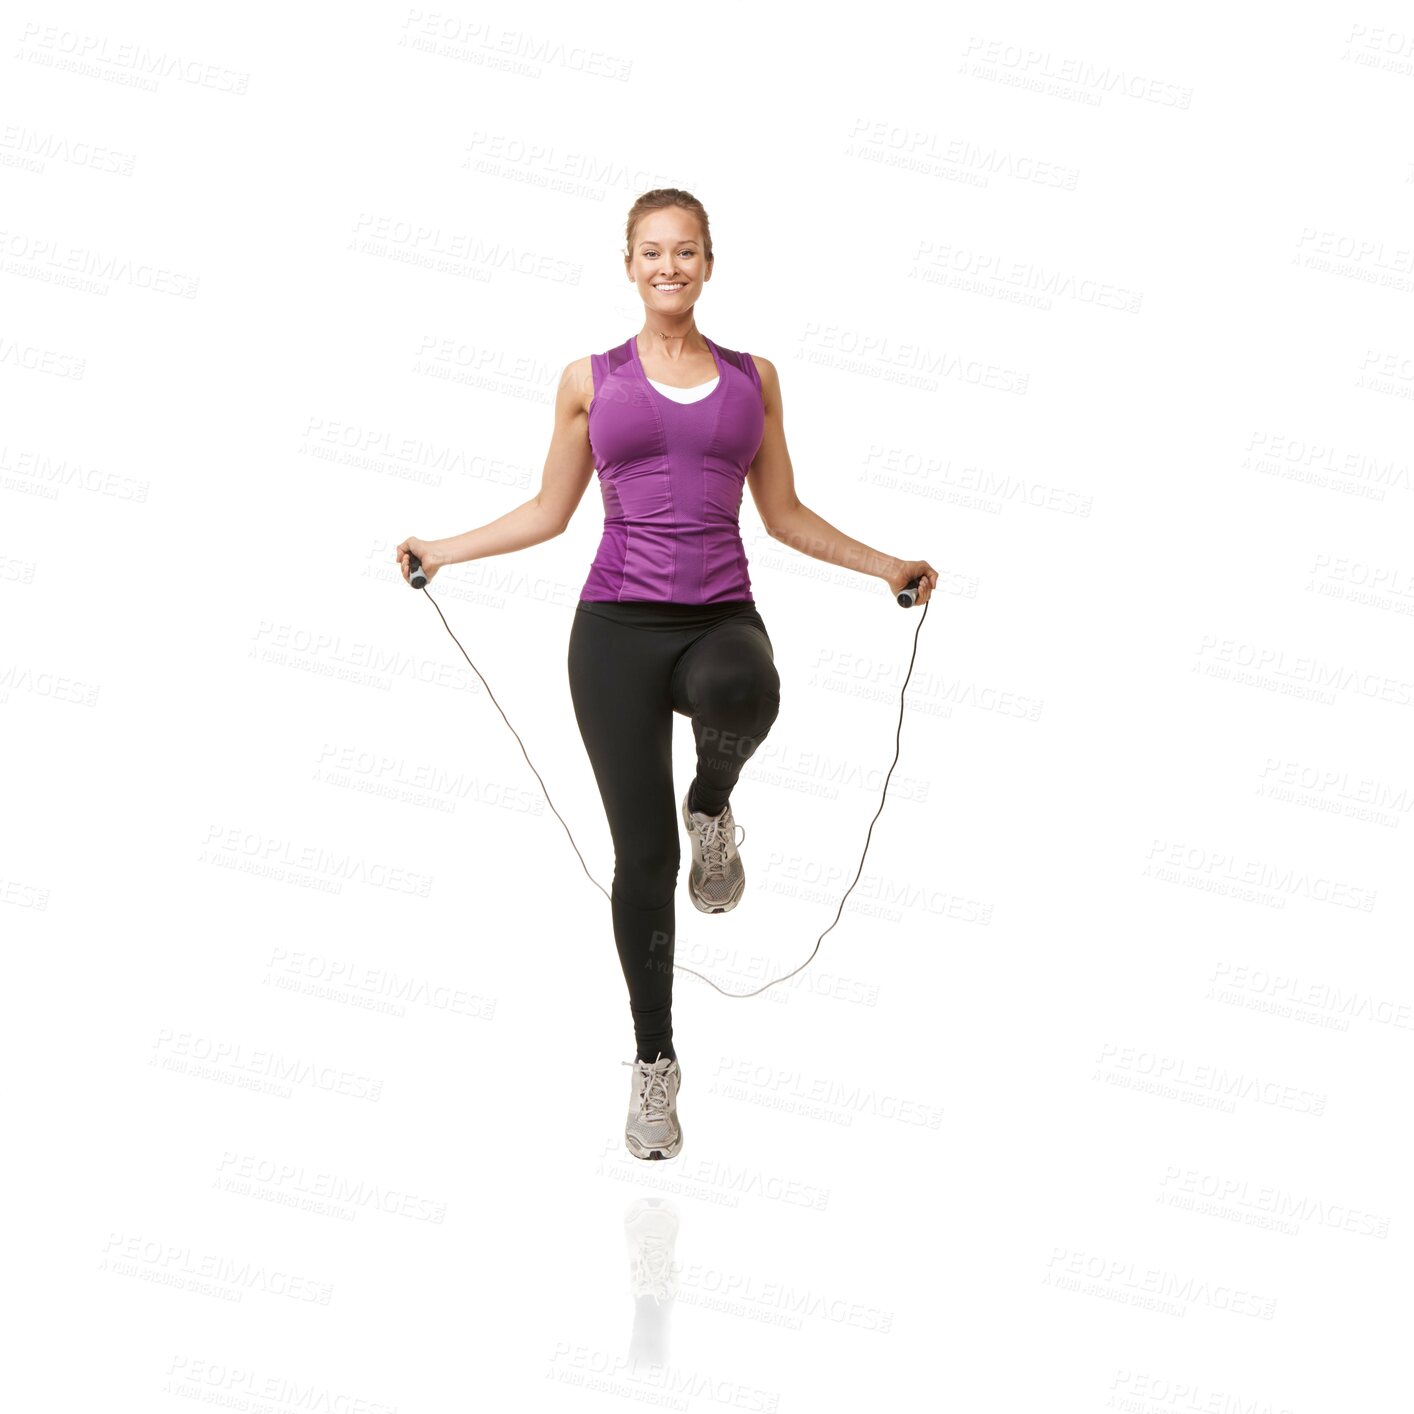 Buy stock photo Fitness, skipping rope and portrait of woman on a white background for exercise, cardio workout and training. Sports, studio and isolated person with gym equipment for health, wellness and jumping